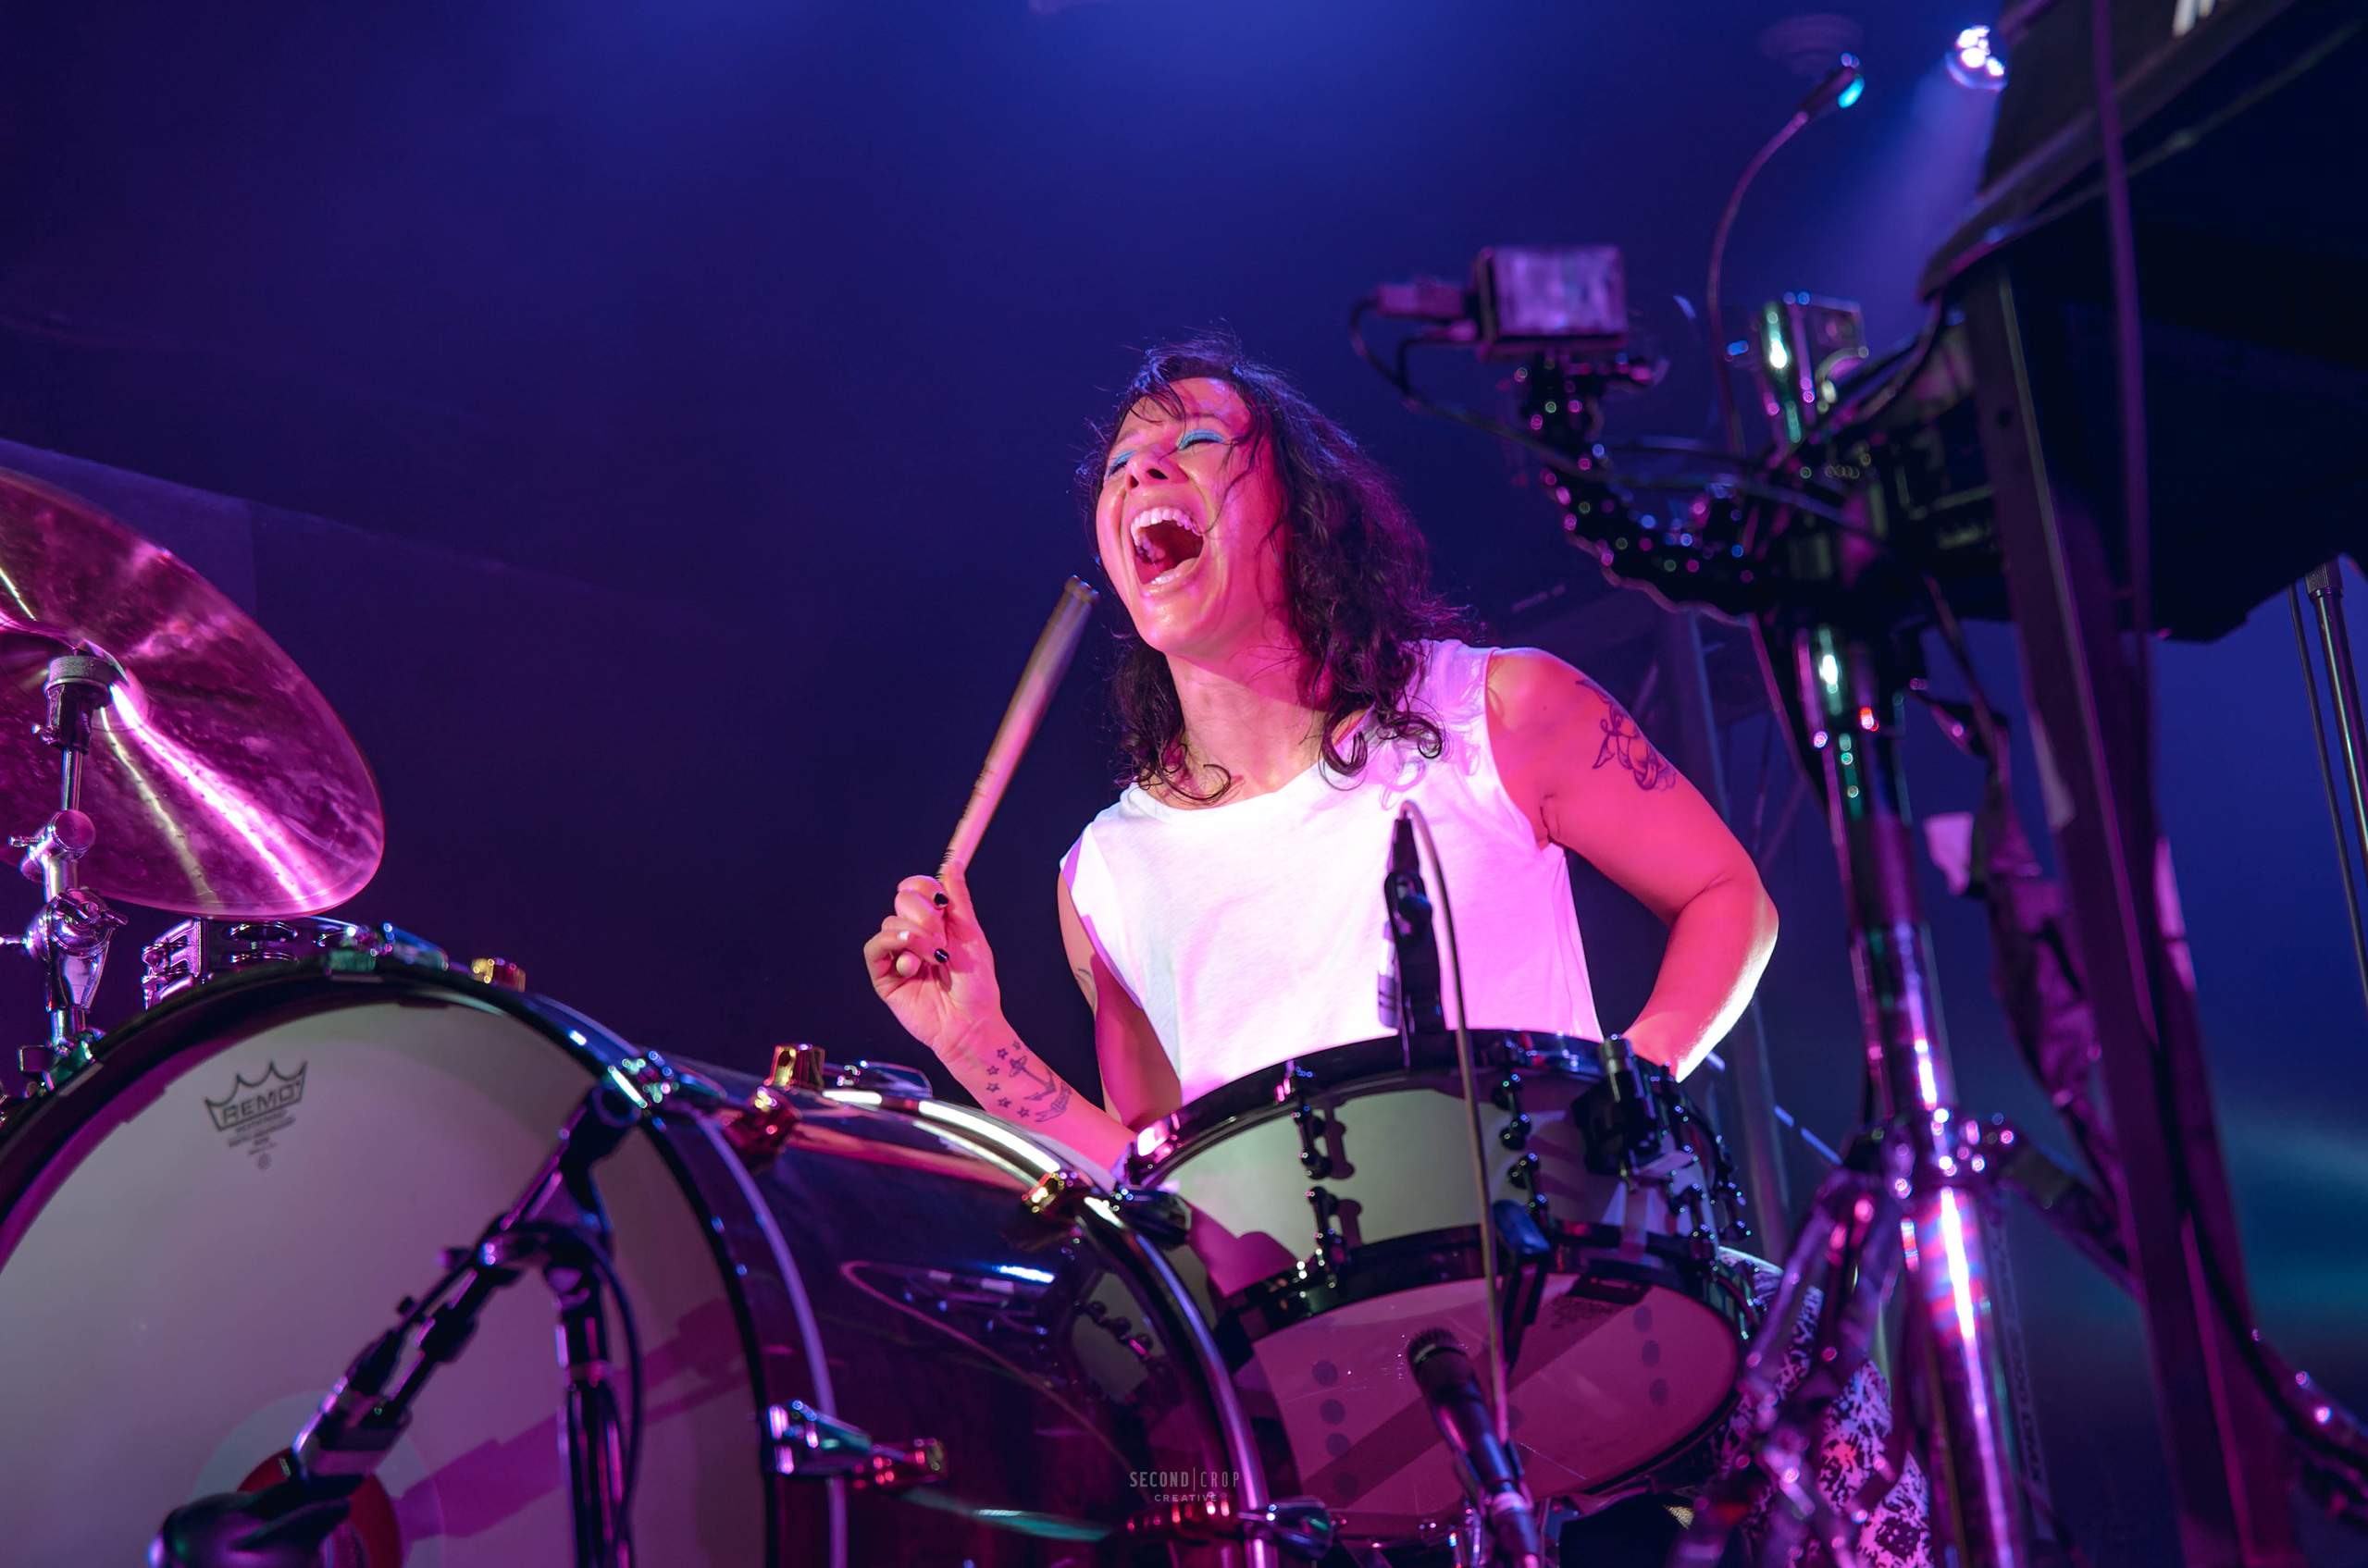 Matt & Kim performing at The Majestic in Madison, WI as part of Yahoo on the Road, September 29th, 2014, photography by Ross Harried for Second Crop Music